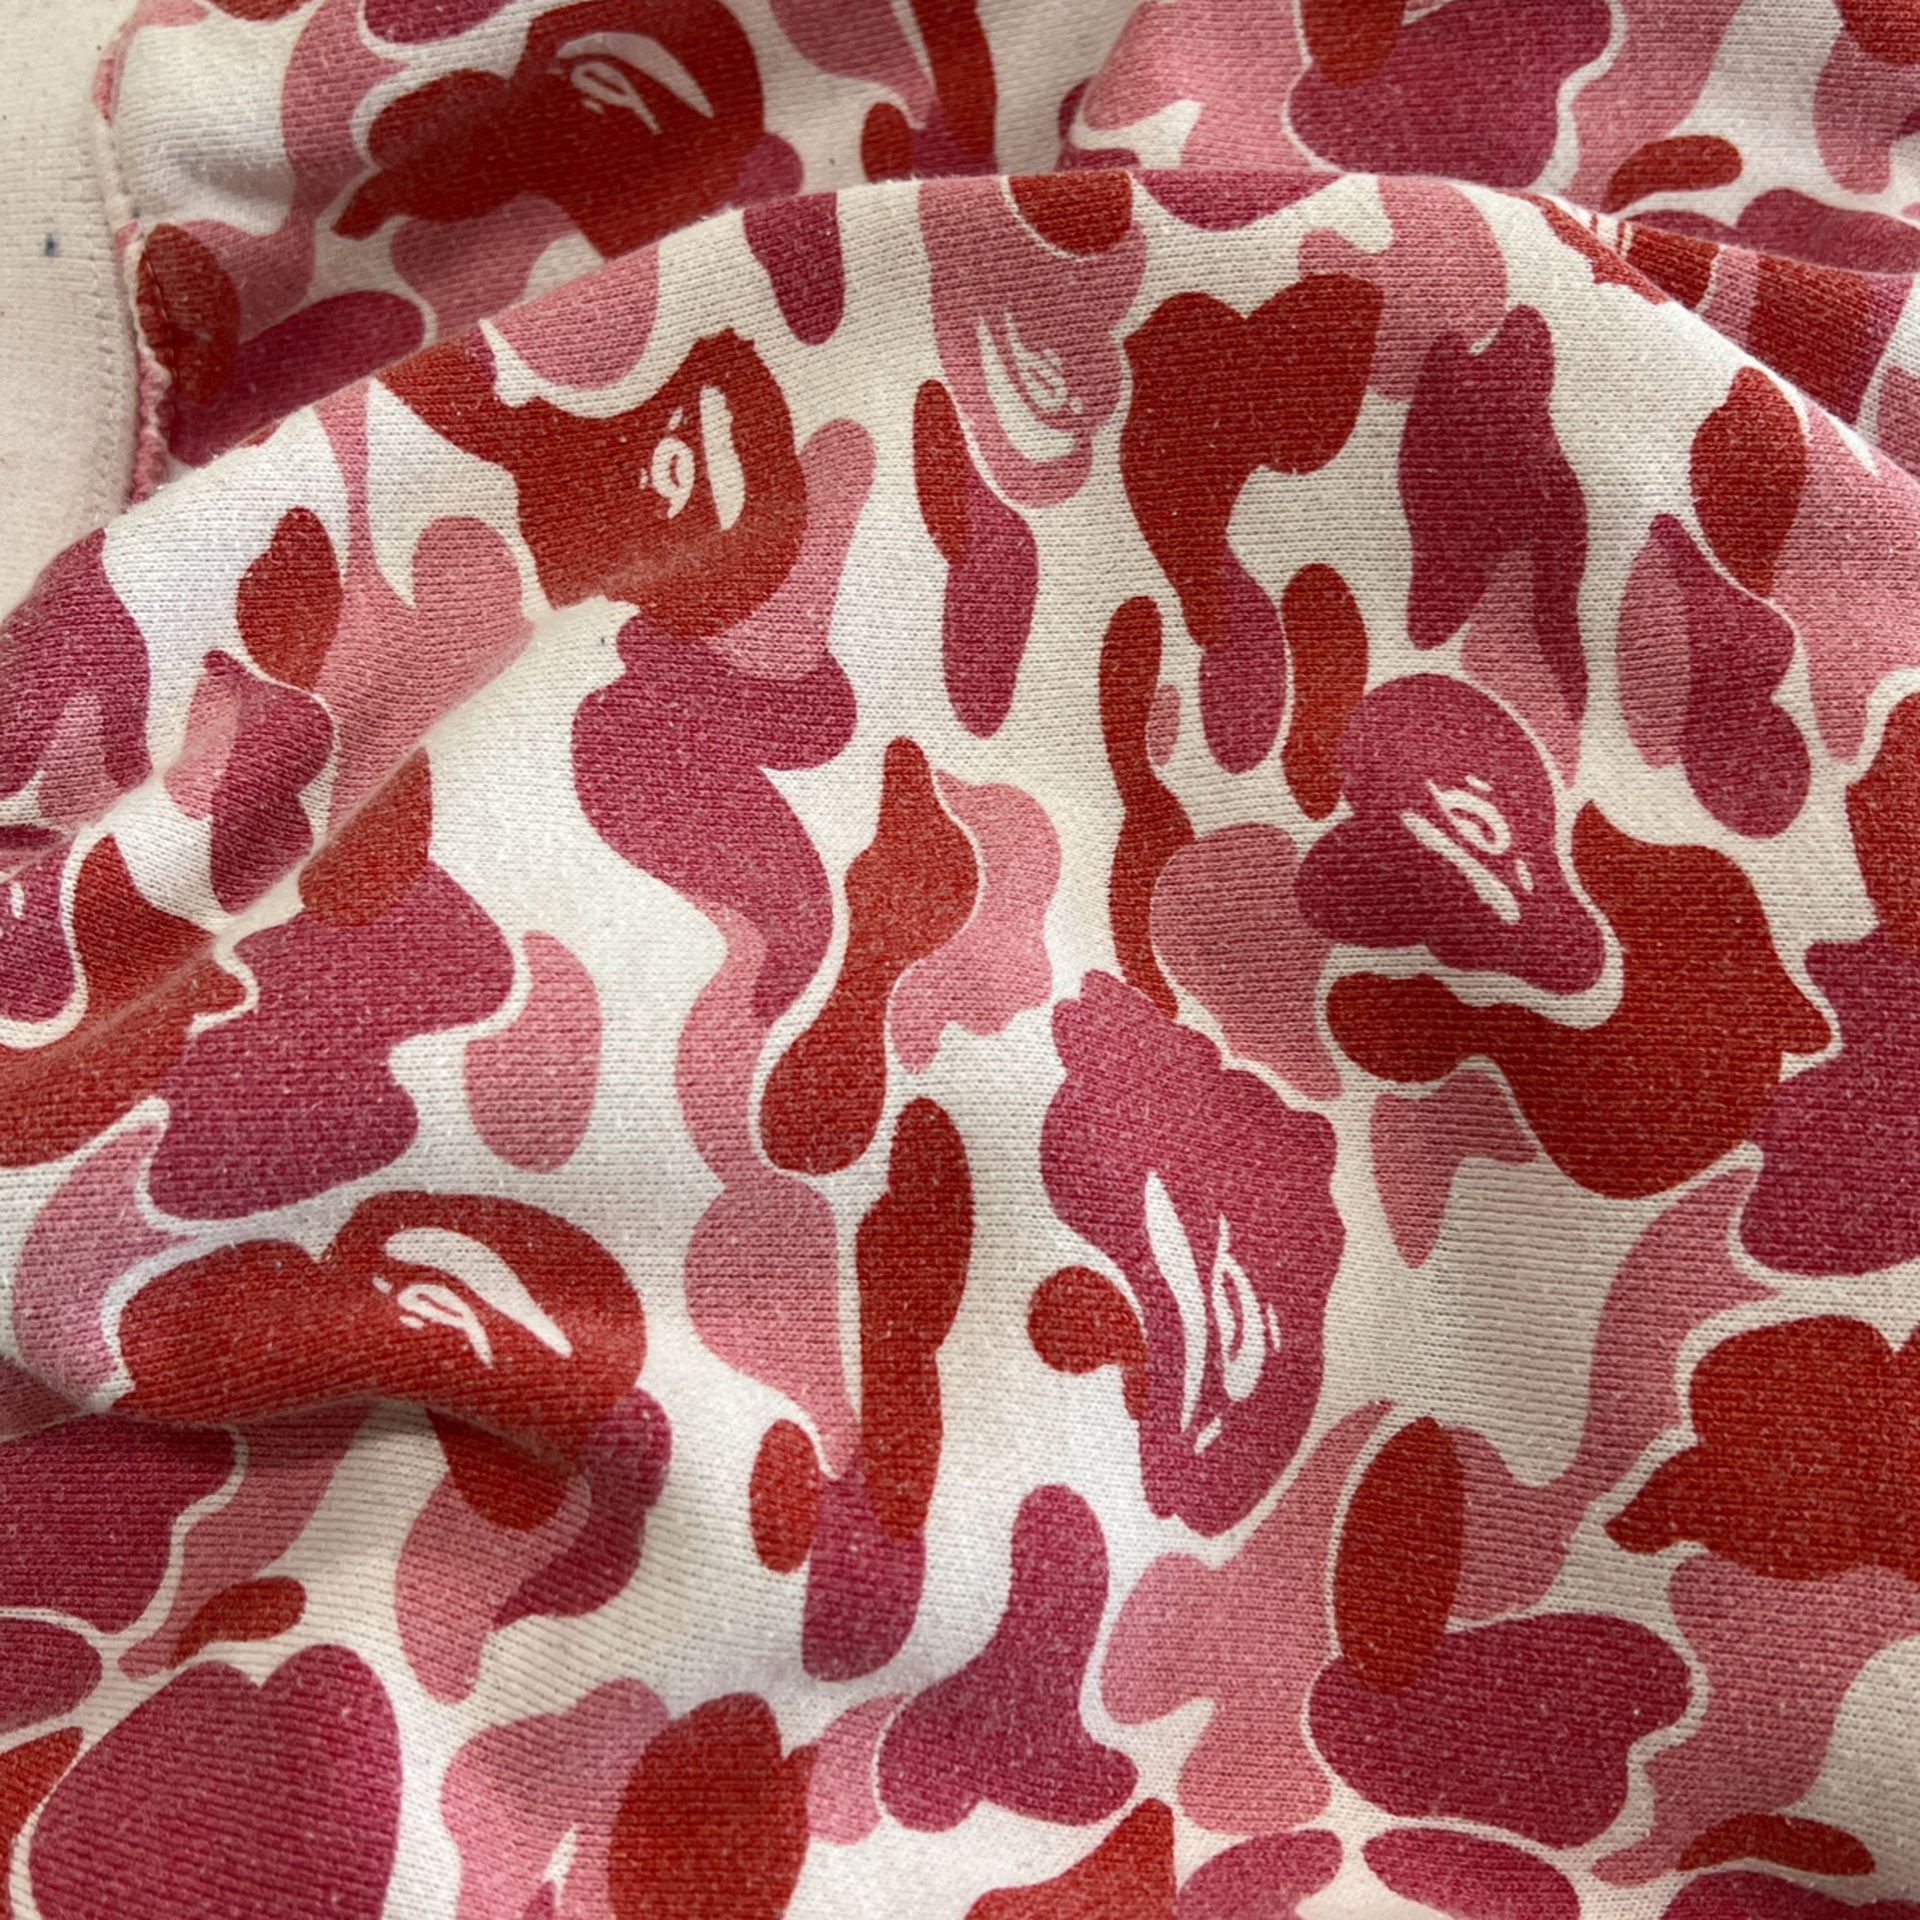 Real Pink Bathing Ape Hoodie (Bought for $430)